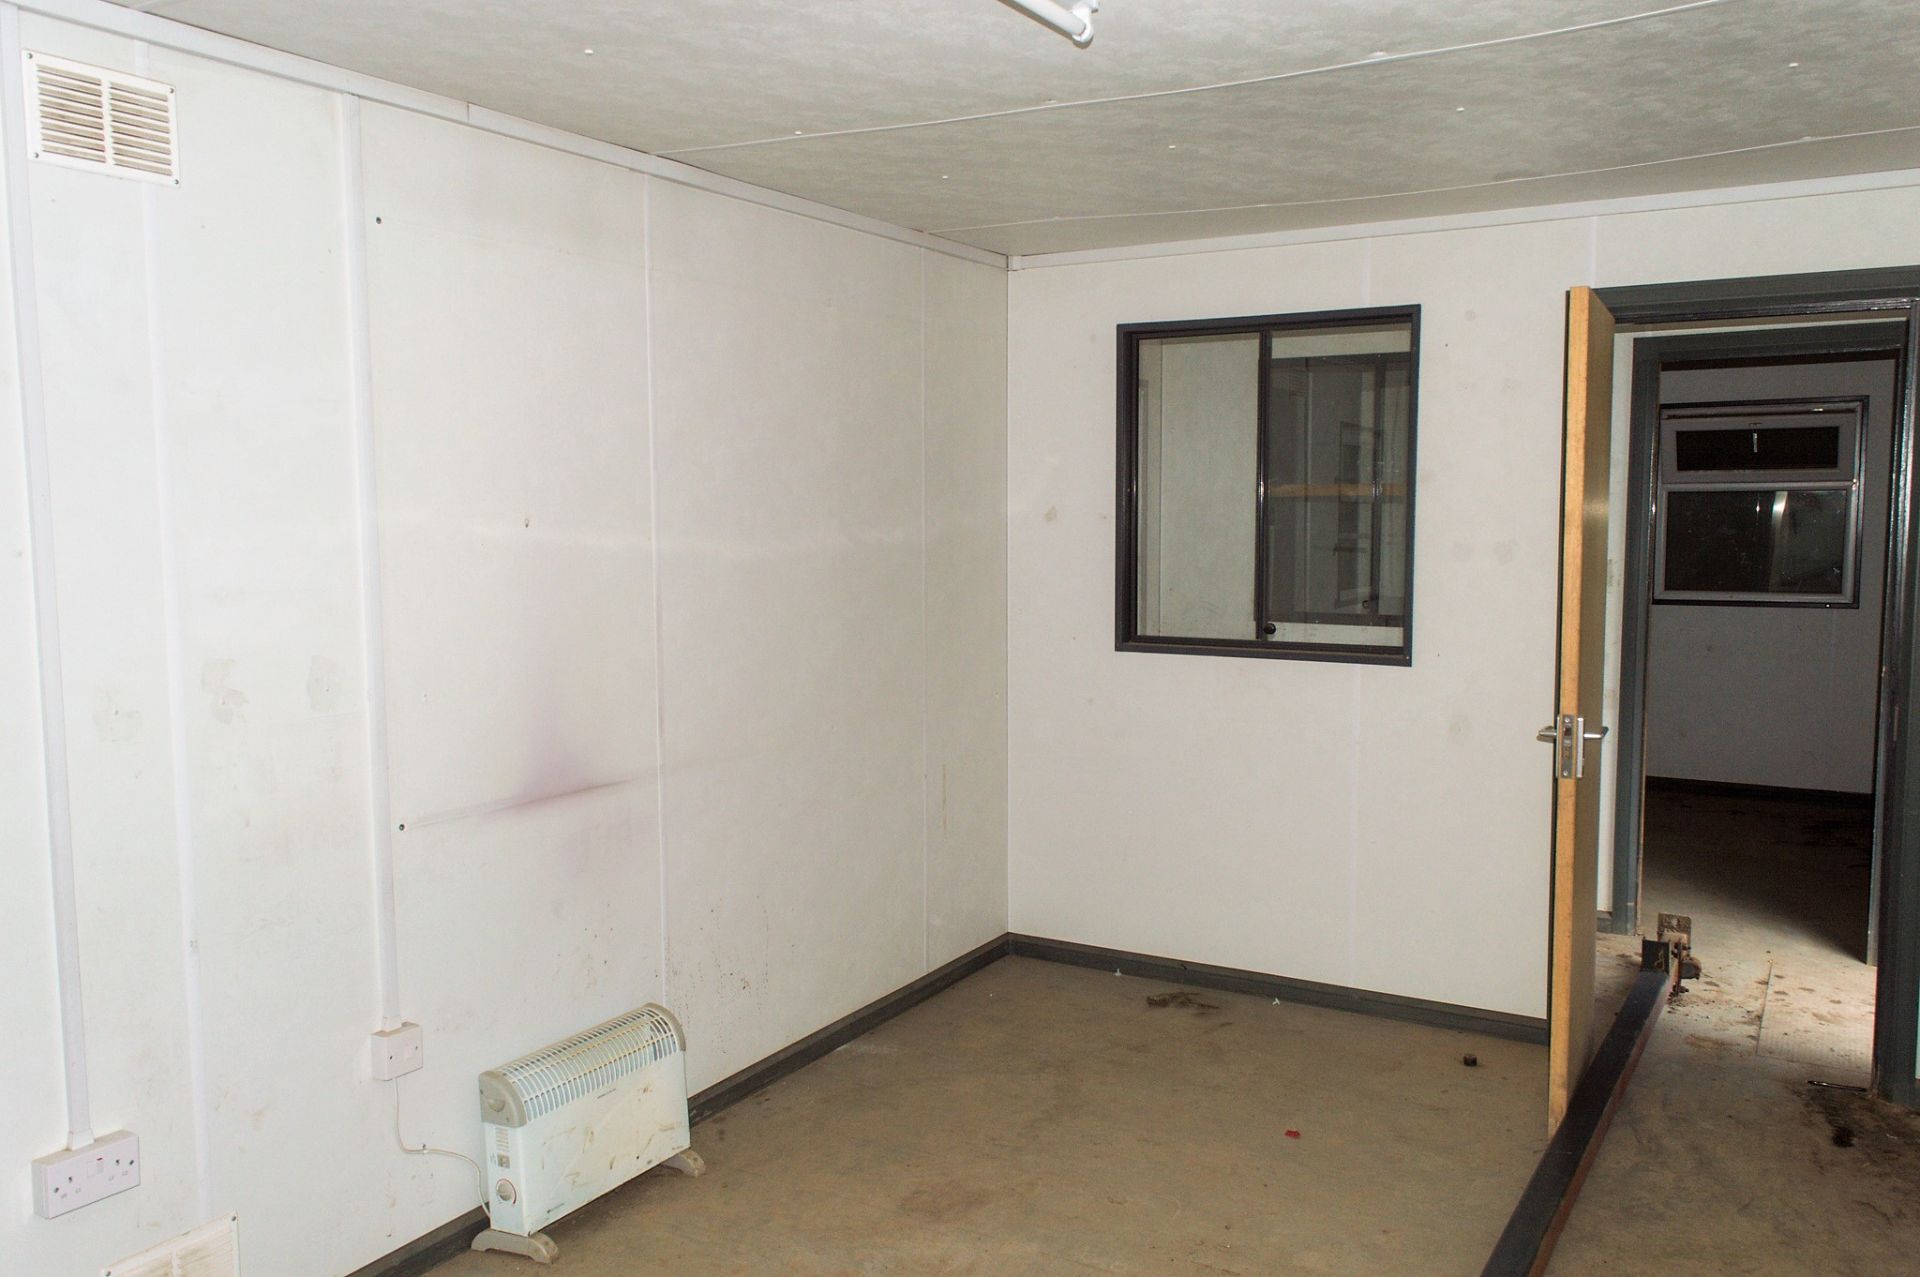 32ft x 10ft steel anti vandal jack leg office site unit Comprising of 2 offices & lobby GT457154 - Image 7 of 8